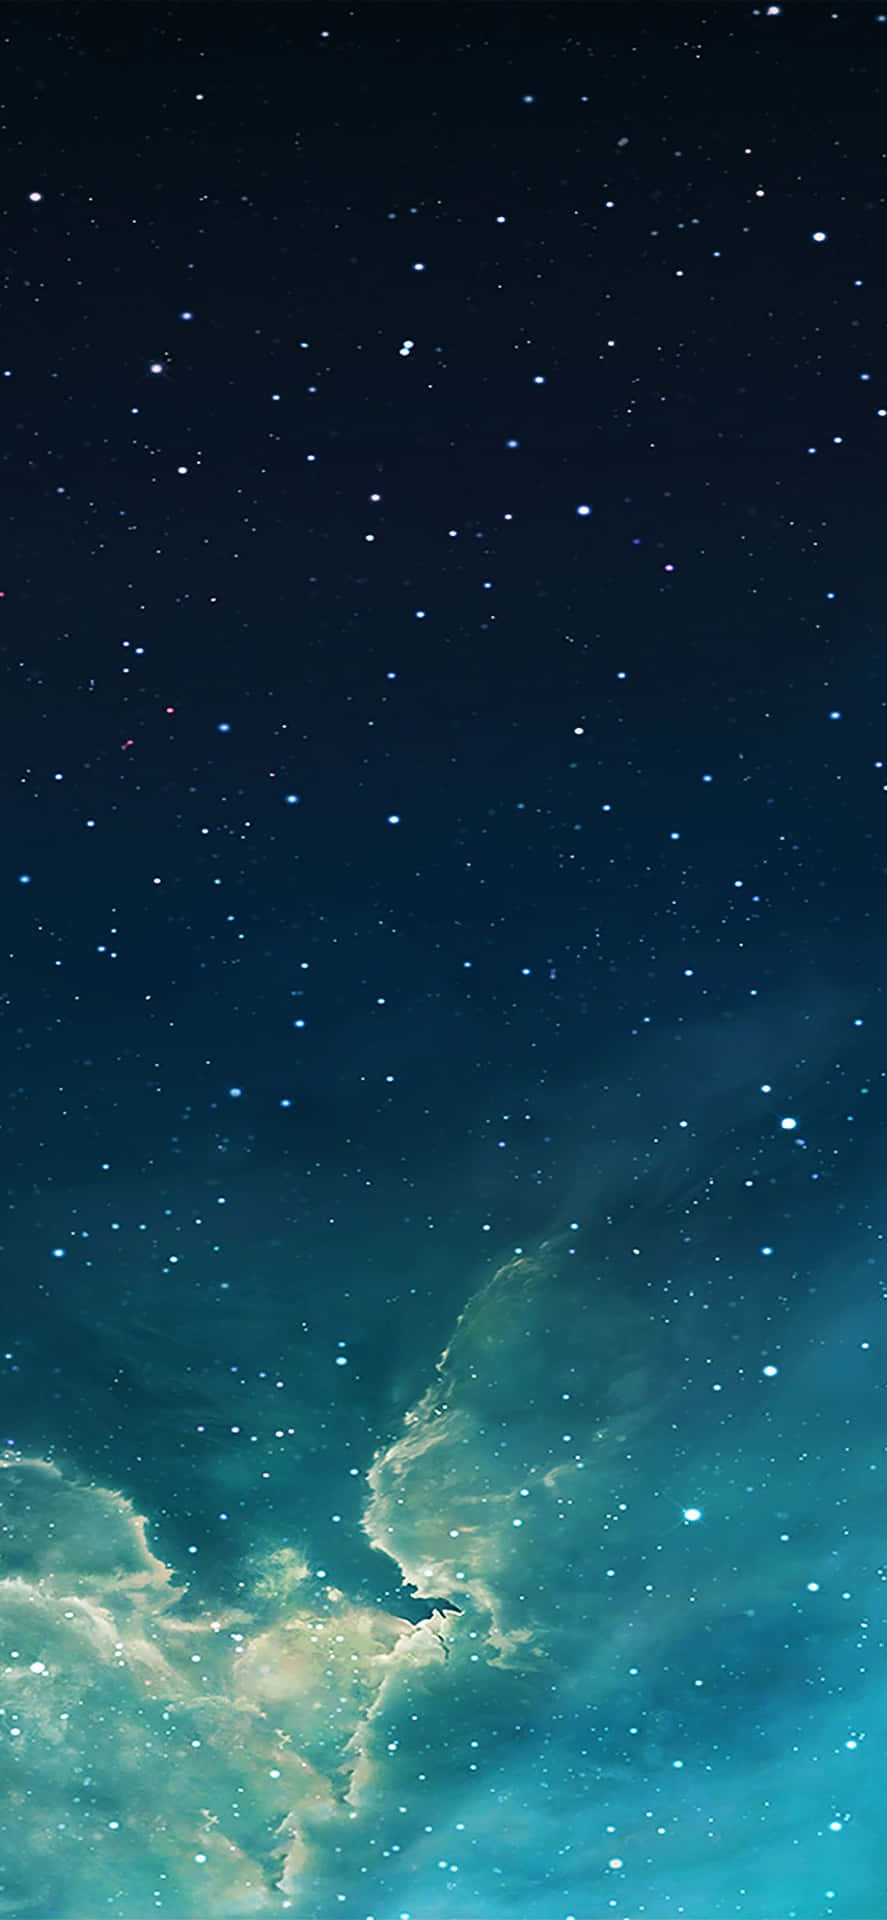 Capturing the beautiful night sky with all its galaxies Wallpaper